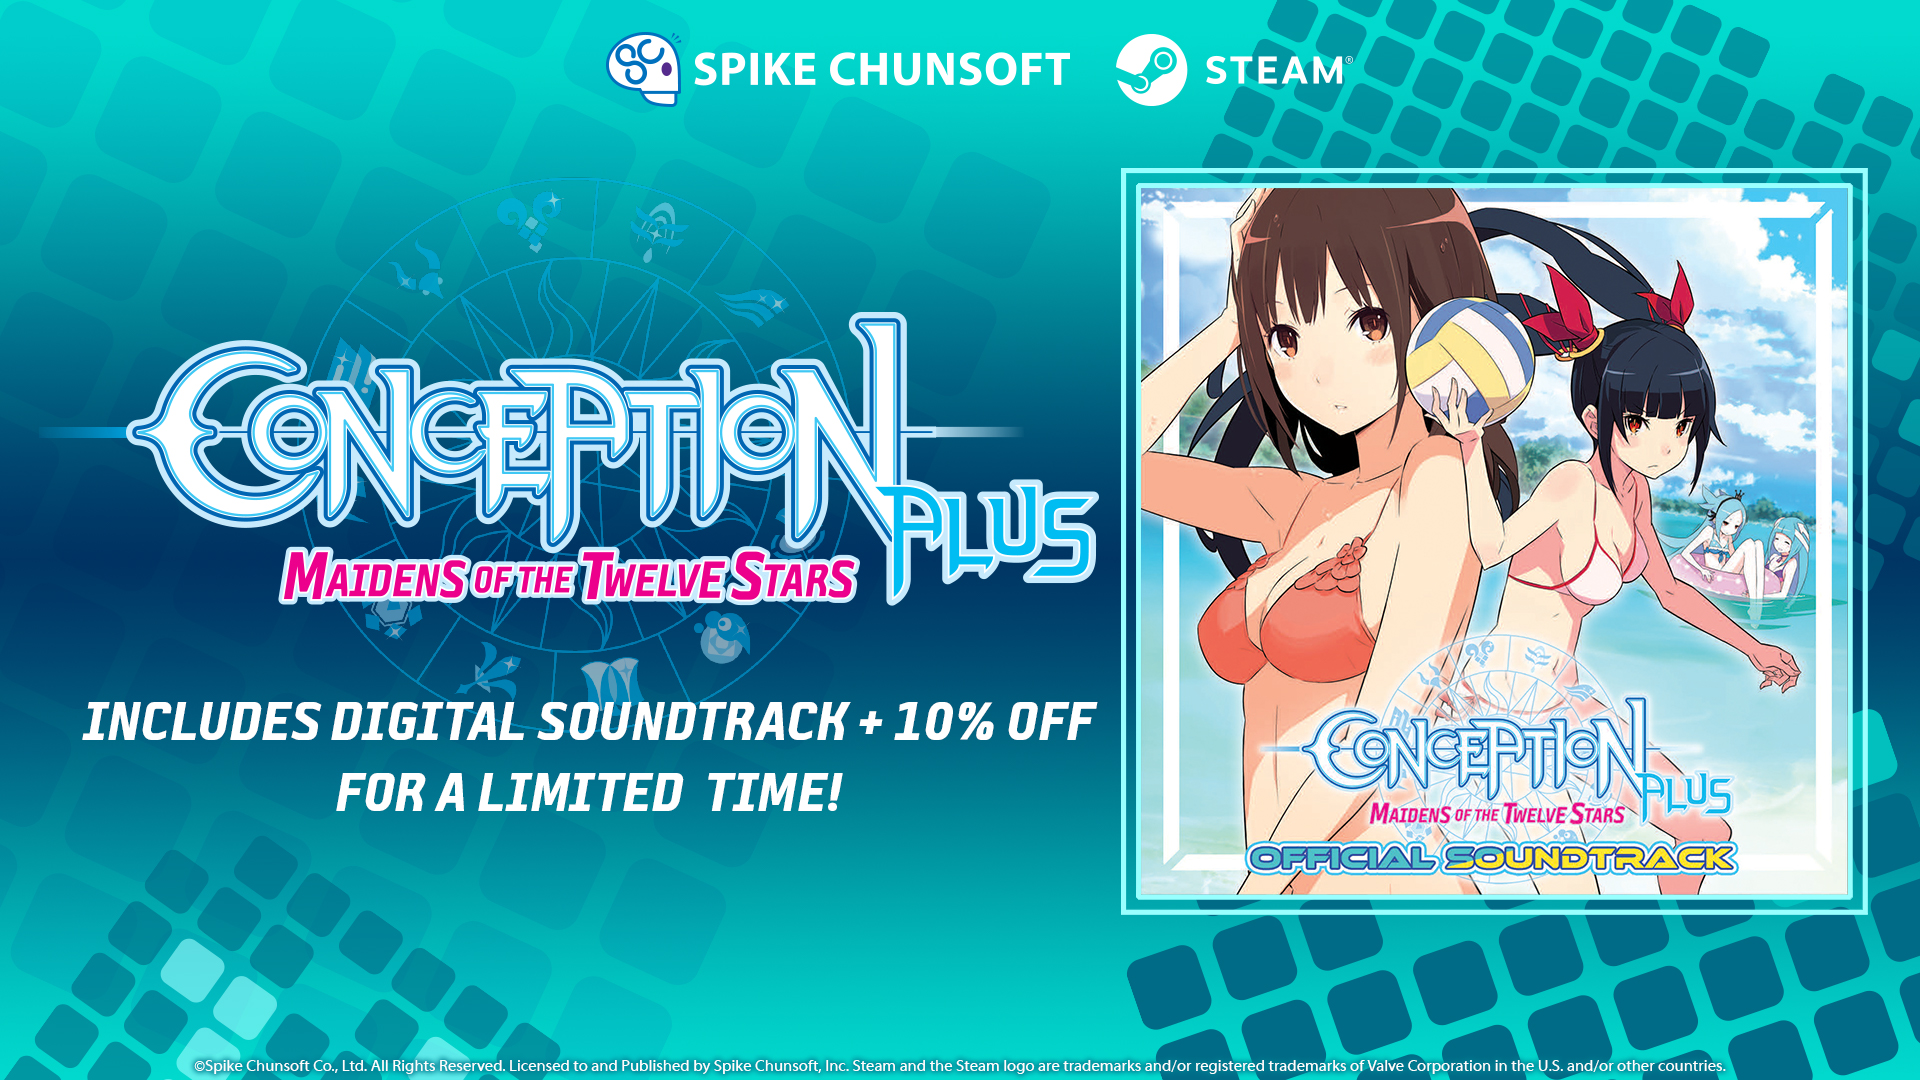  Conception PLUS: Maidens of the Twelve Stars - PlayStation 4 :  Sega of America Inc: Video Games